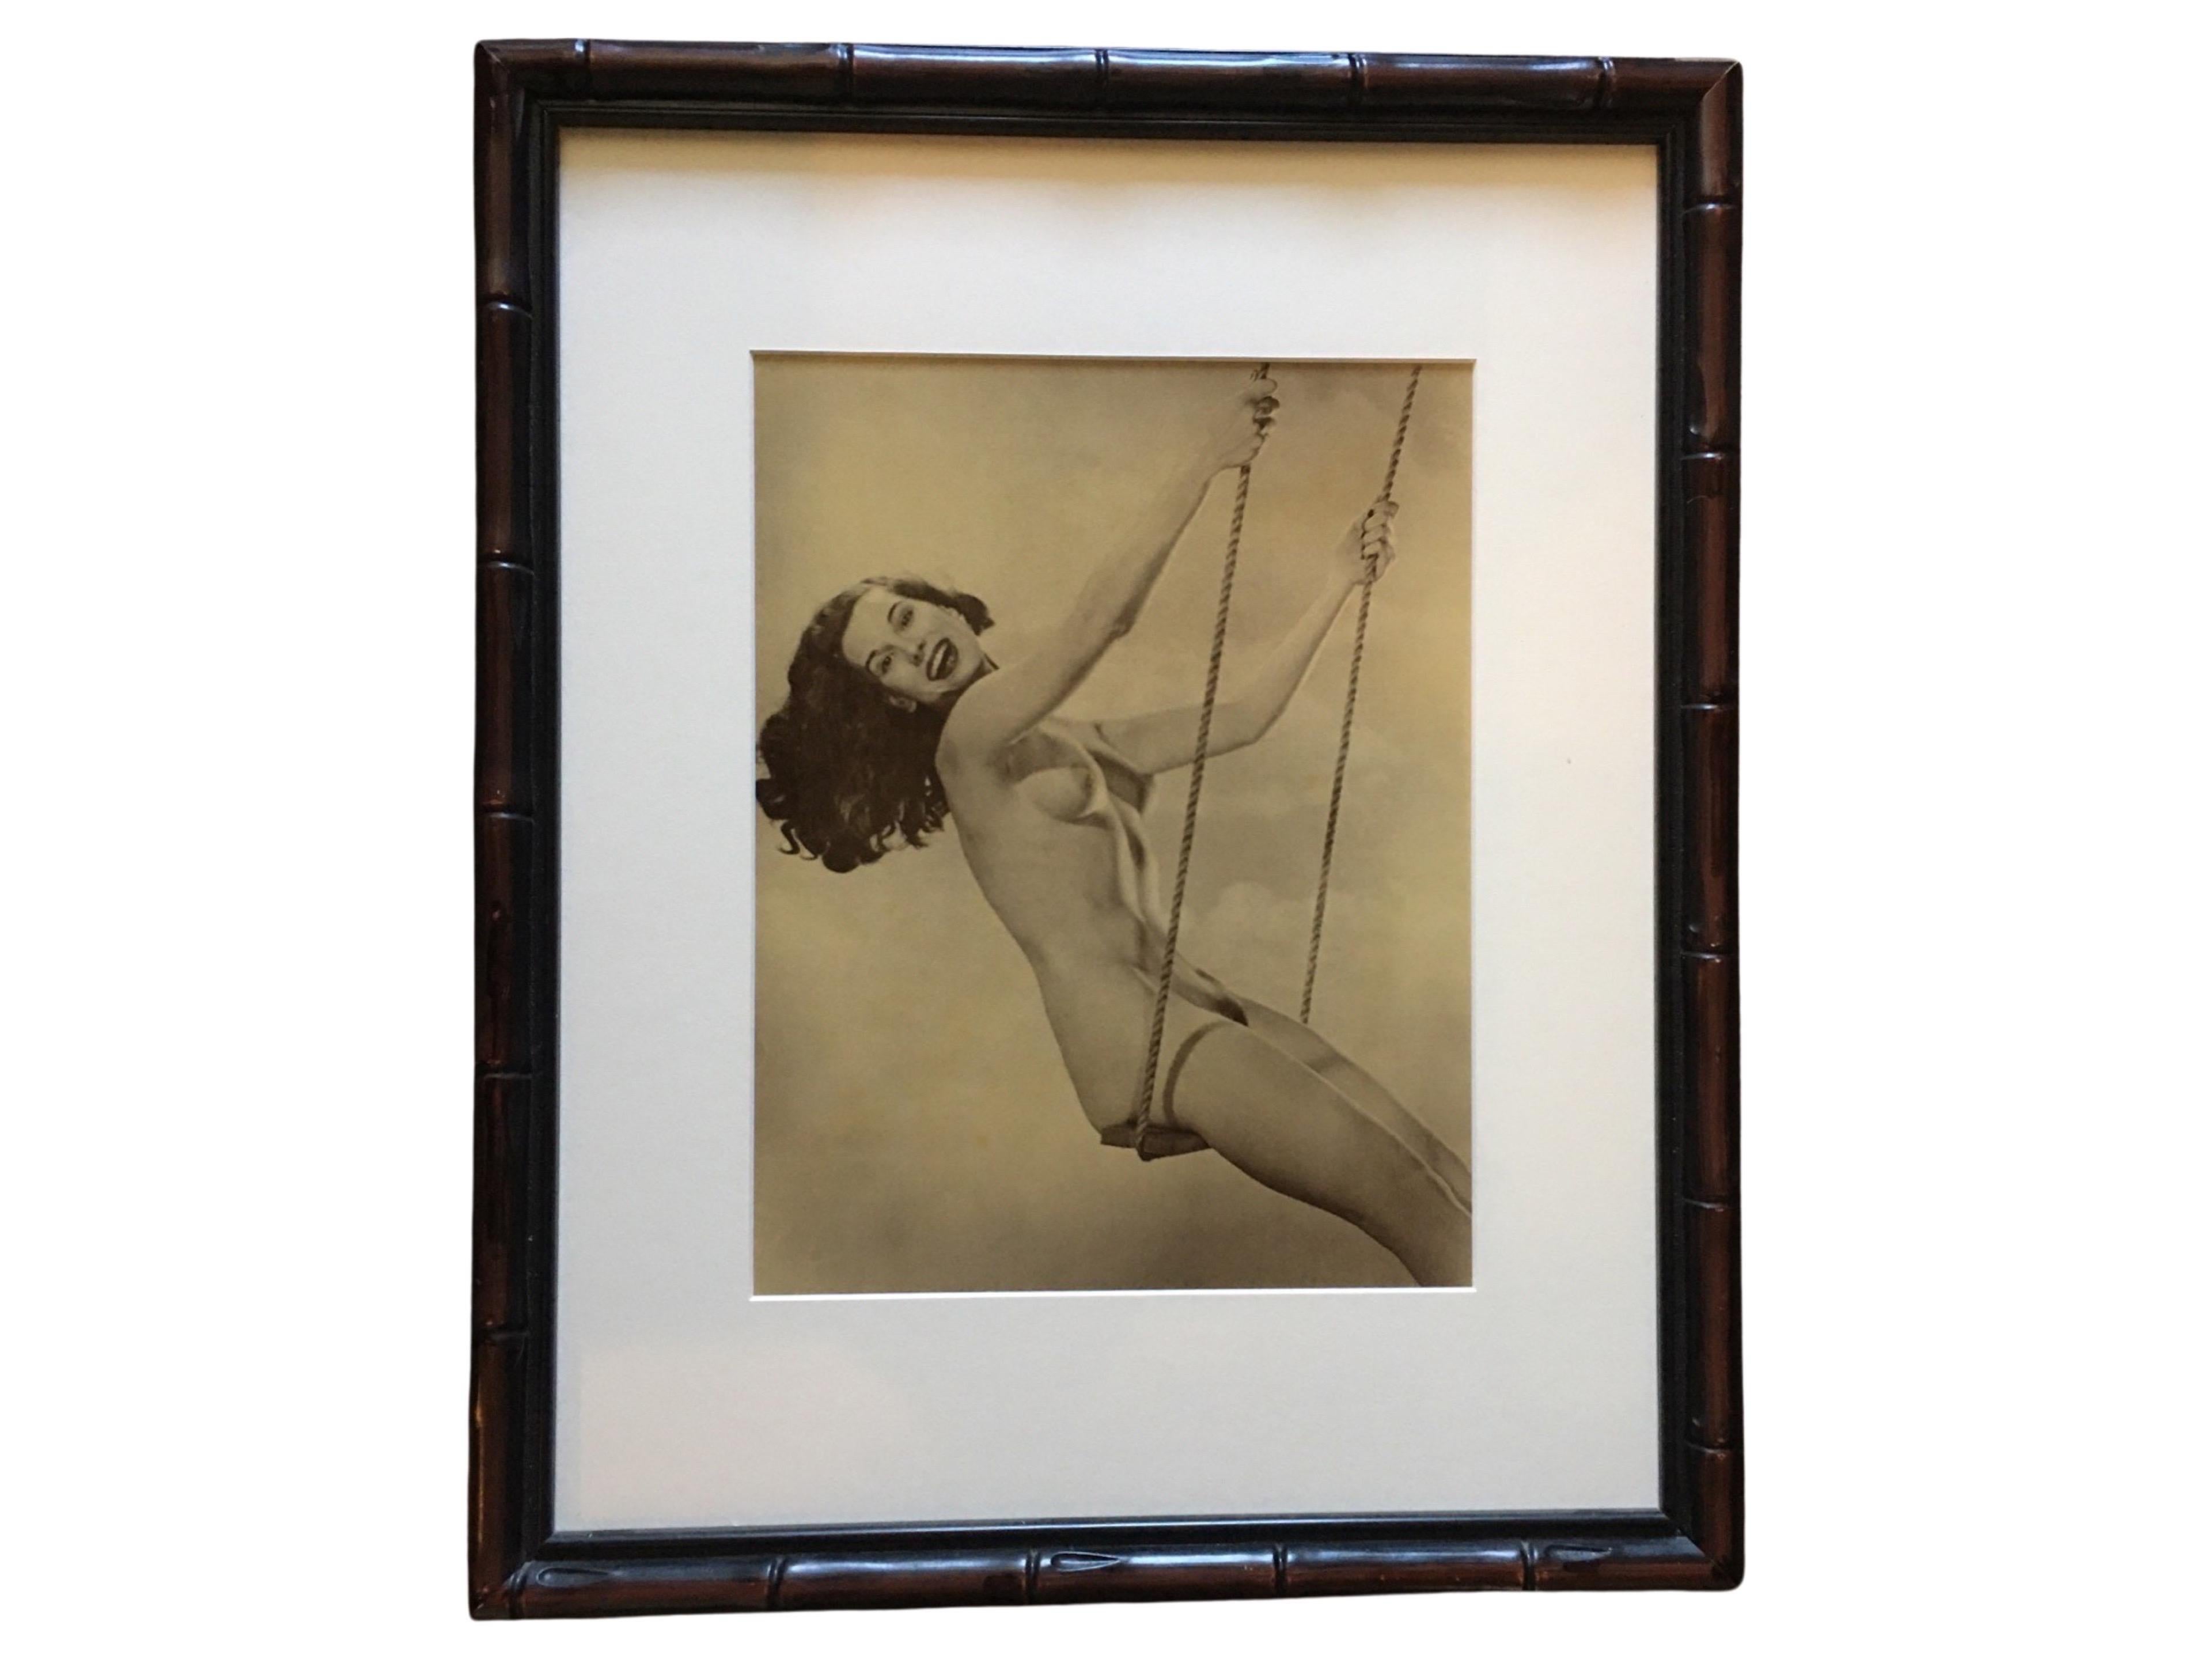 This photograph was part of a large collection purchased  in the Hollywood hills in the early 90s. All the photographs were mid-century 1950s original photographs largely of male and female nudes. This is a rare one as it is large photograph: 11 x